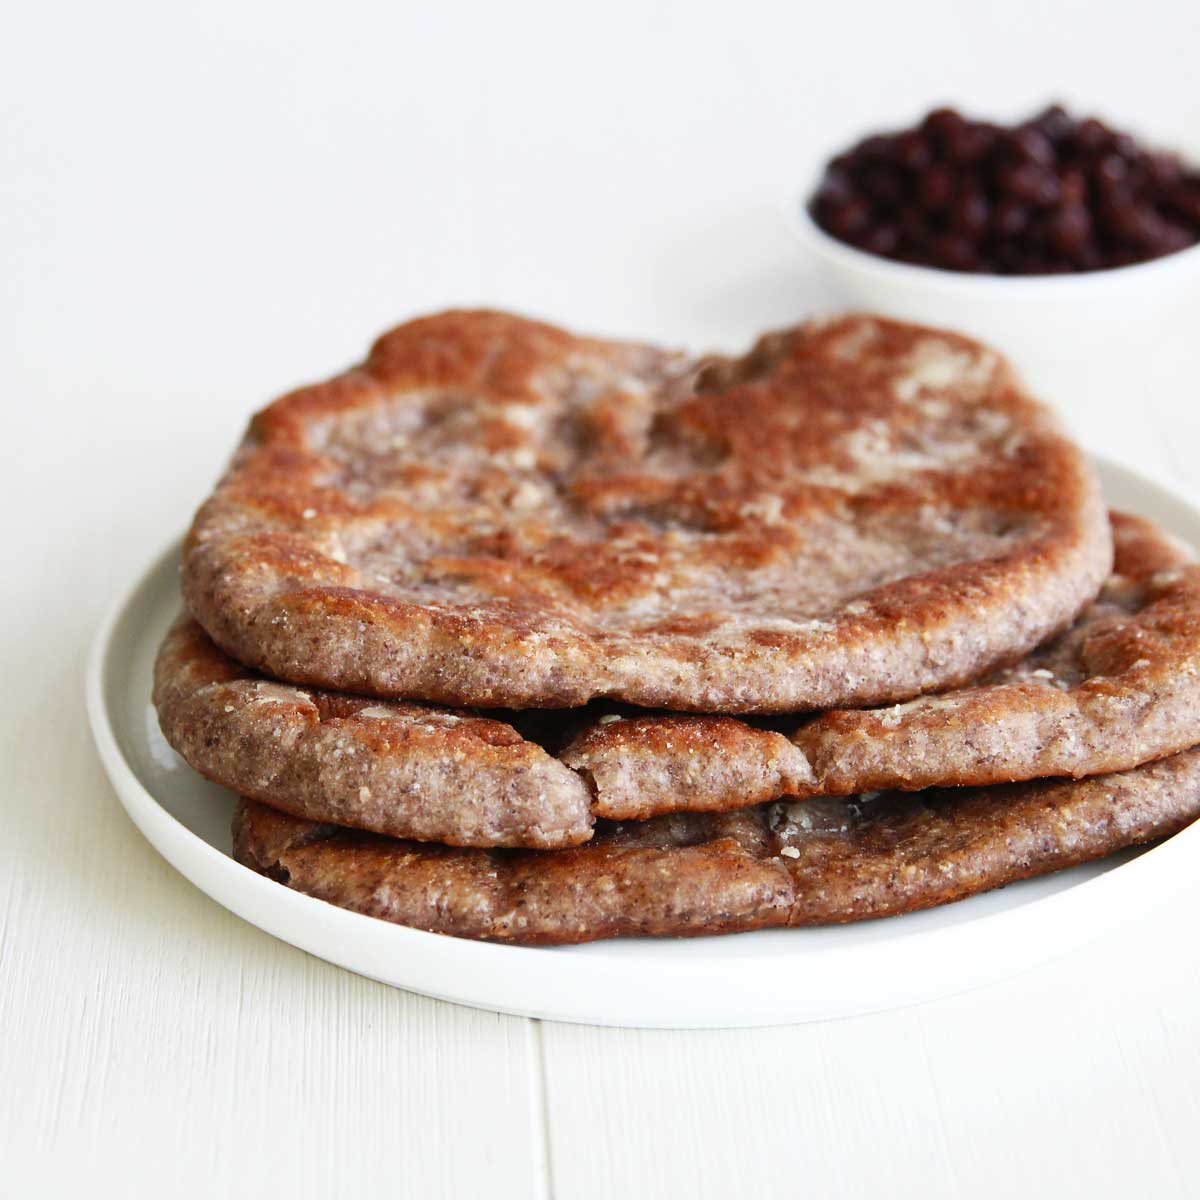 Black Bean Naan (Lower Carb Flatbread Made with Canned Black Beans) - Carrot Cake Cinnamon Rolls